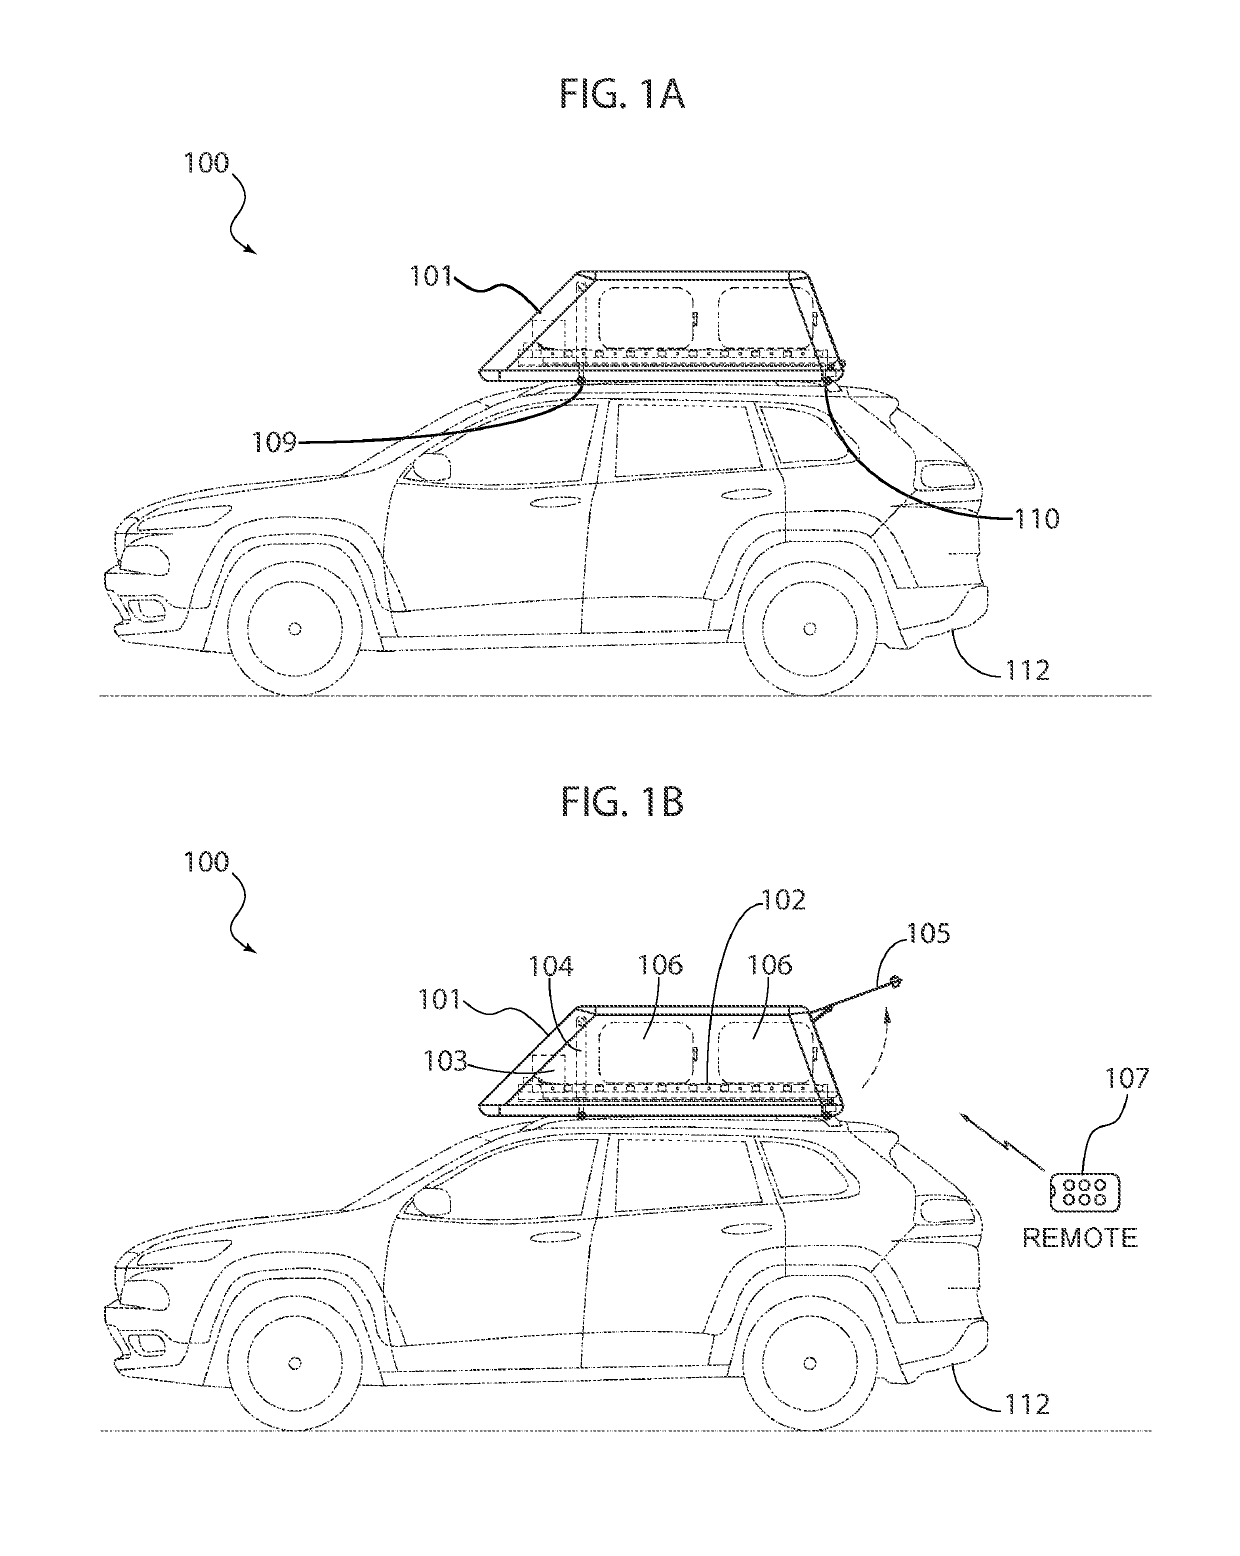 Automated self-loading cargo carrier for vehicles